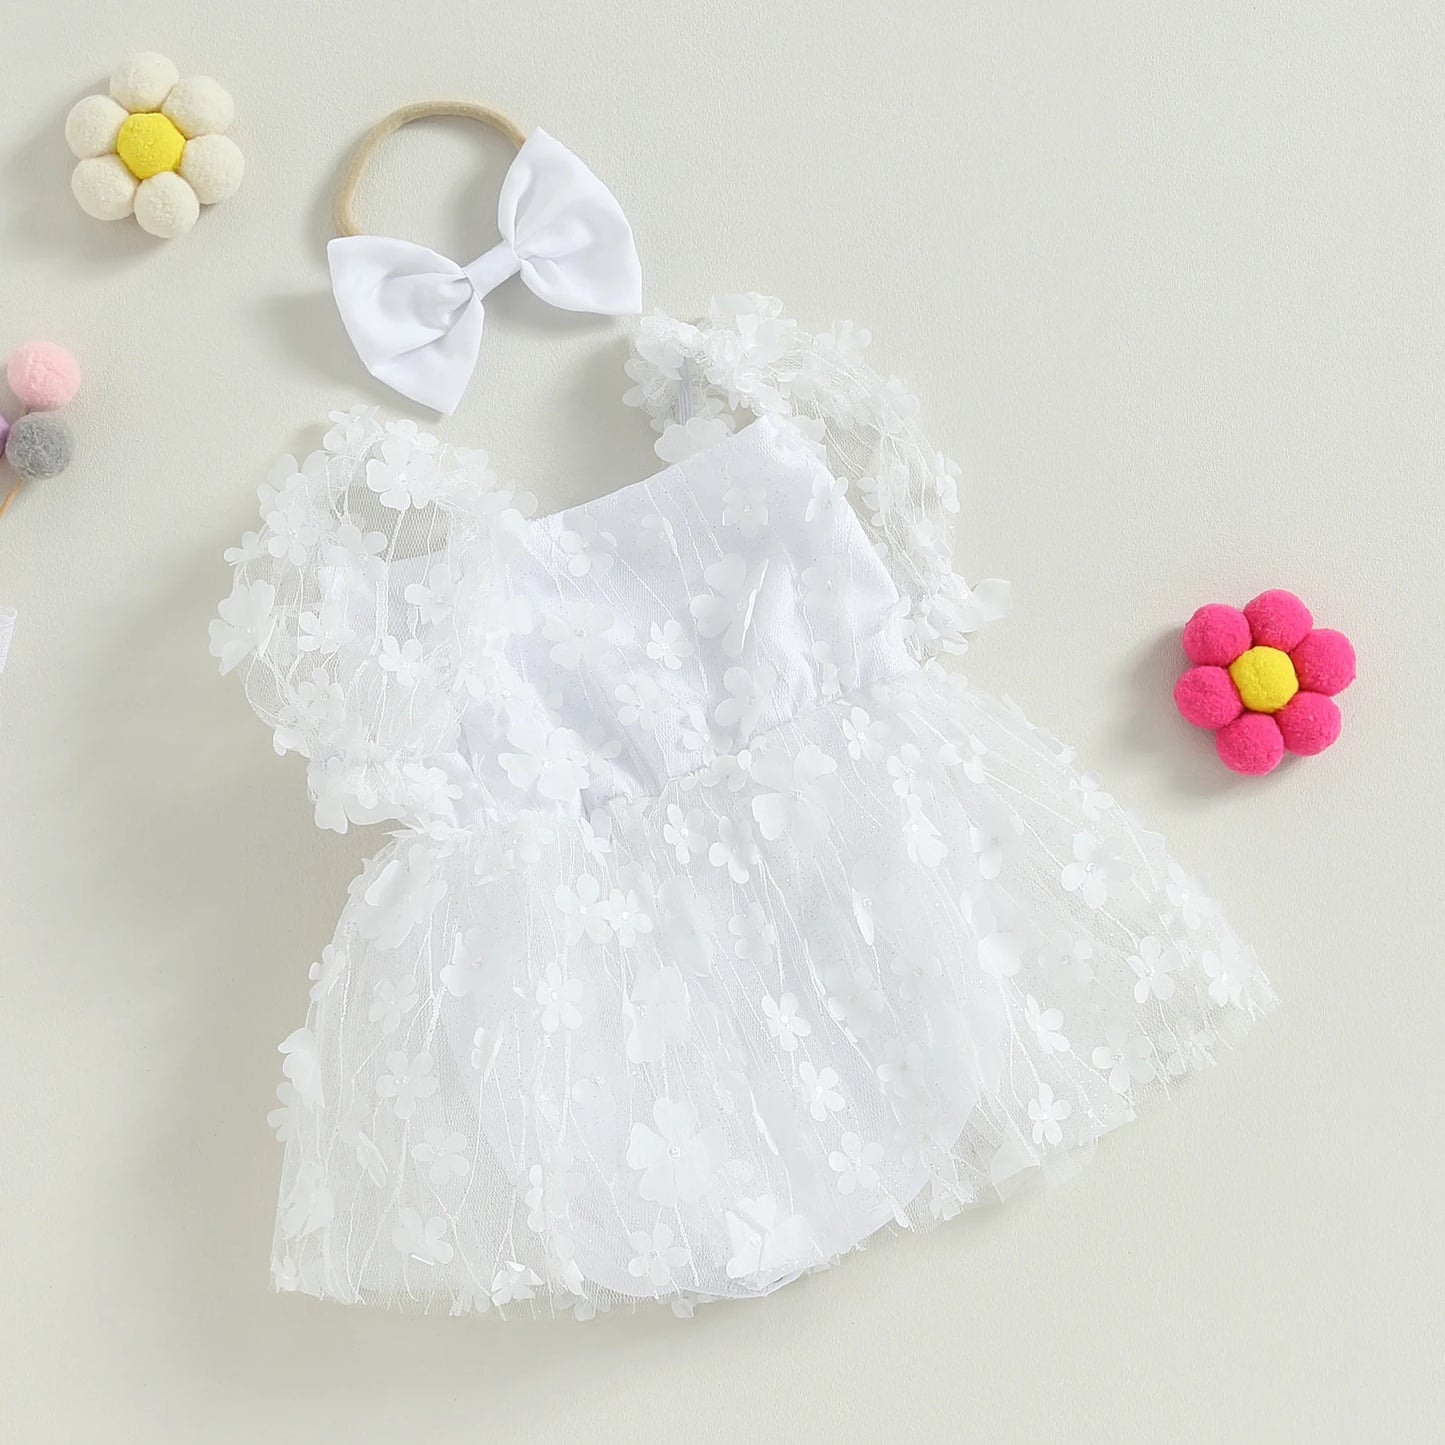 Pudcoco Infant Newborn Baby Girl 2 Piece Outfits Flower Short Sleeve Romper Dress with Cute Headband Set Summer Clothes 0-18M